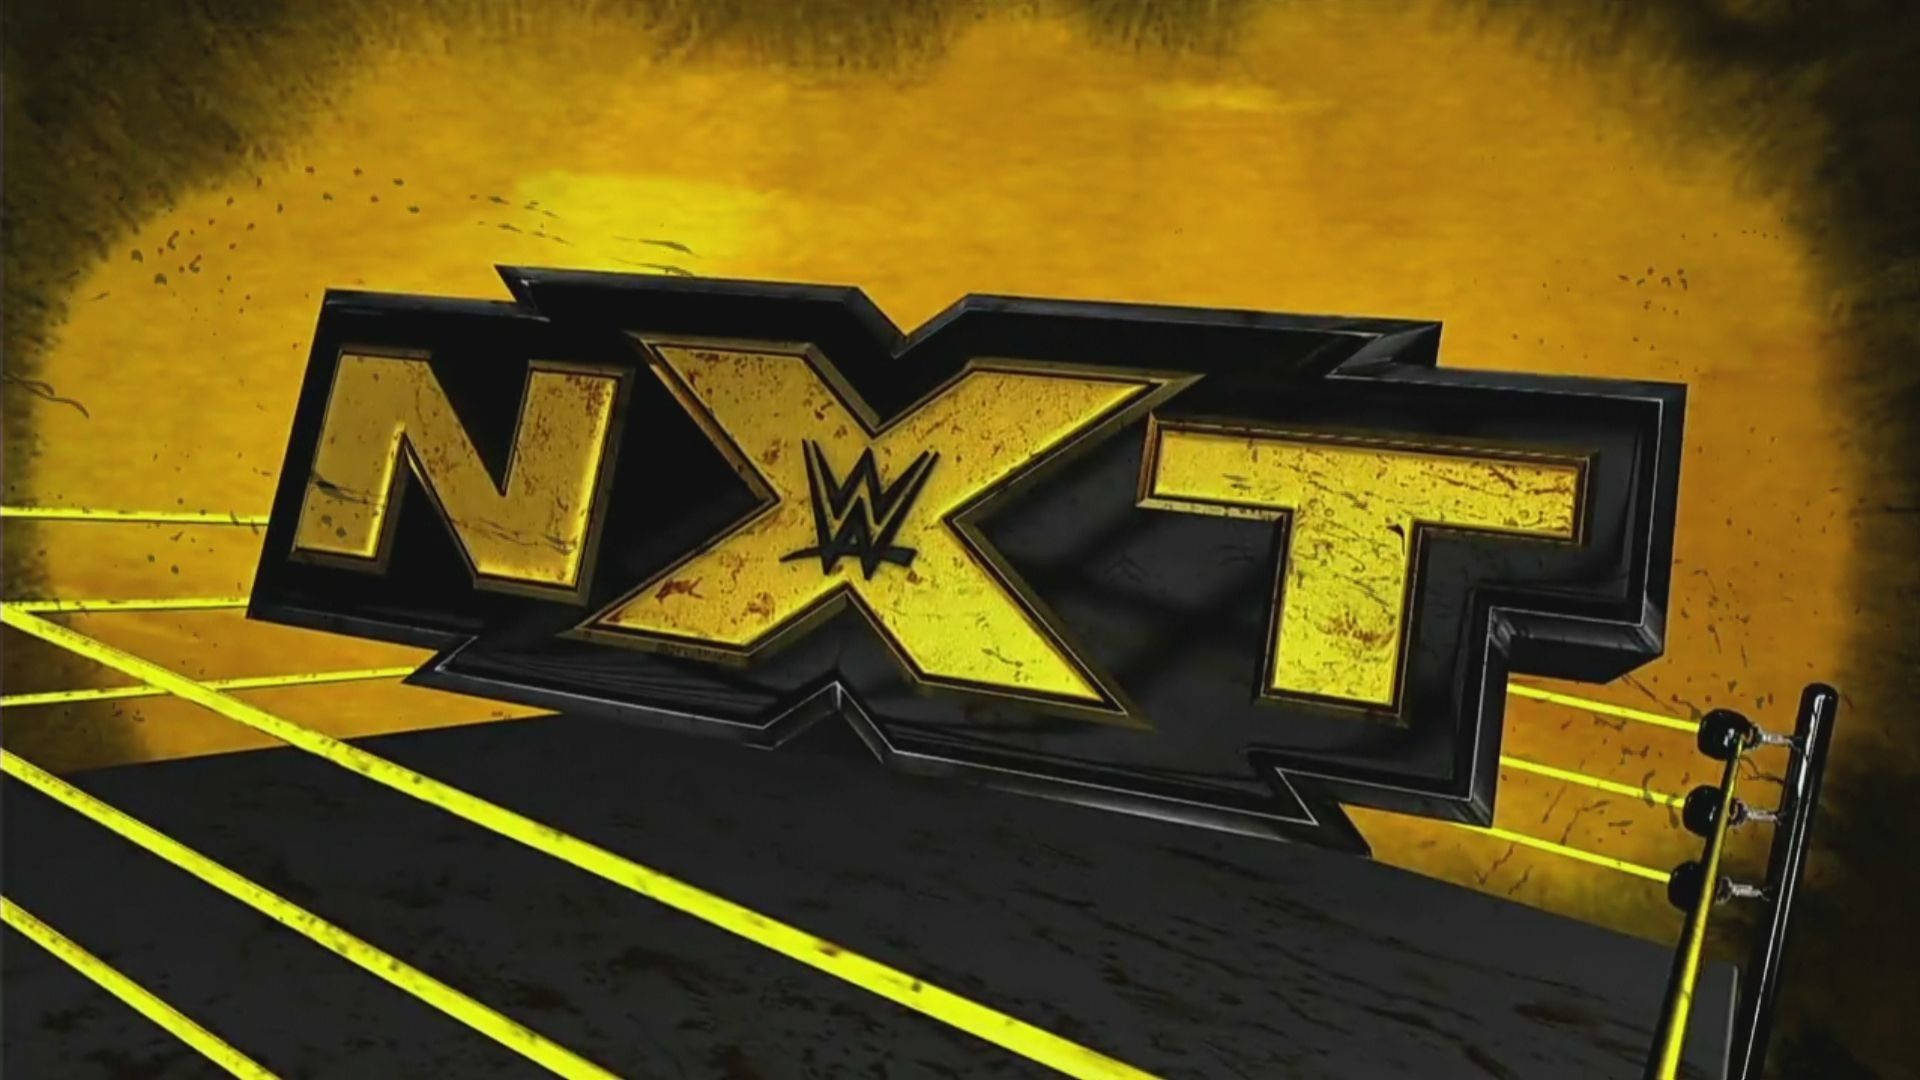 Wwe Nxt Poster